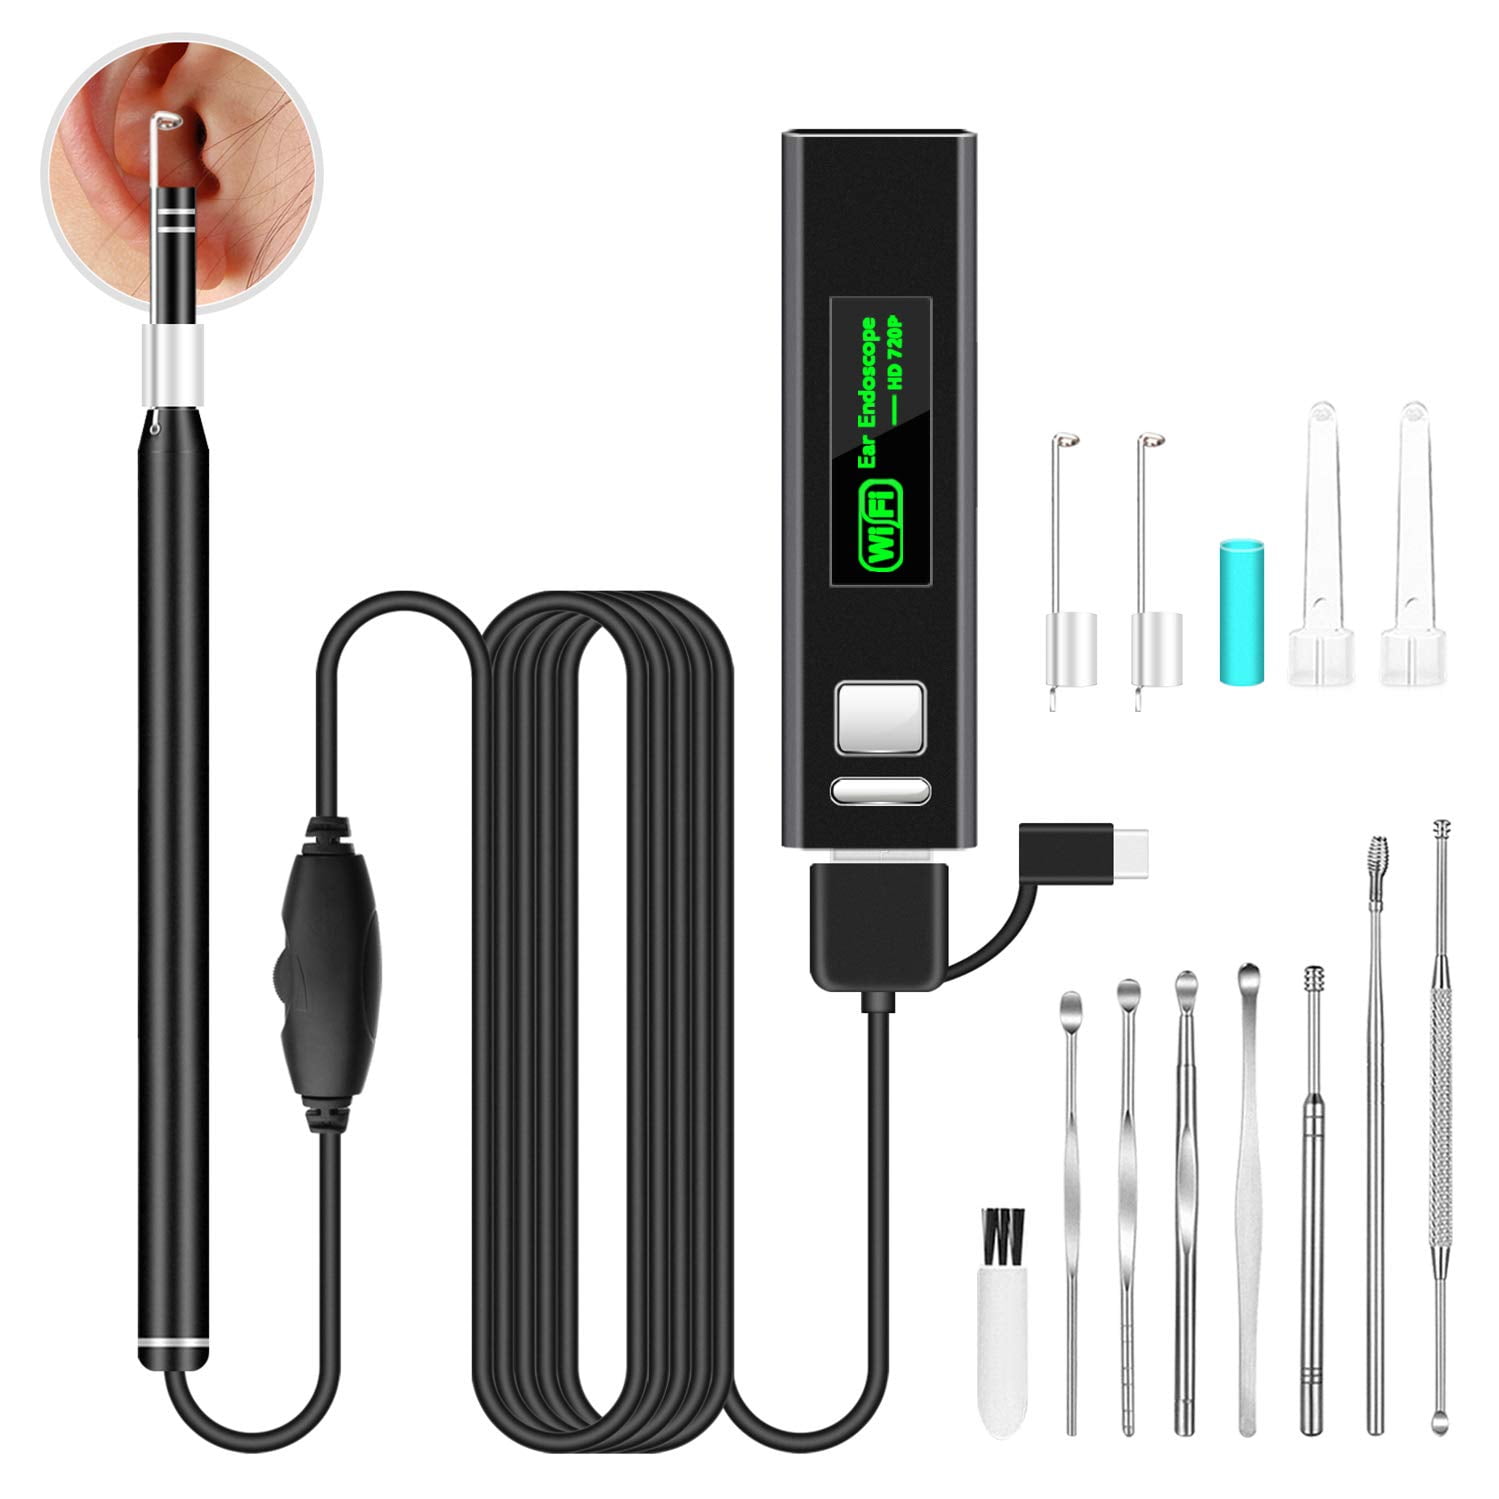 USB Otoscope， CrazyFire Digital Ear Endoscope 720P HD Ear Inspection Camera Earwax Cleaning Tool with 6 LEDs Compatible for Micro USB & USB-C Android Devices Windows & MAC/PC Not for iPhone or iPad 